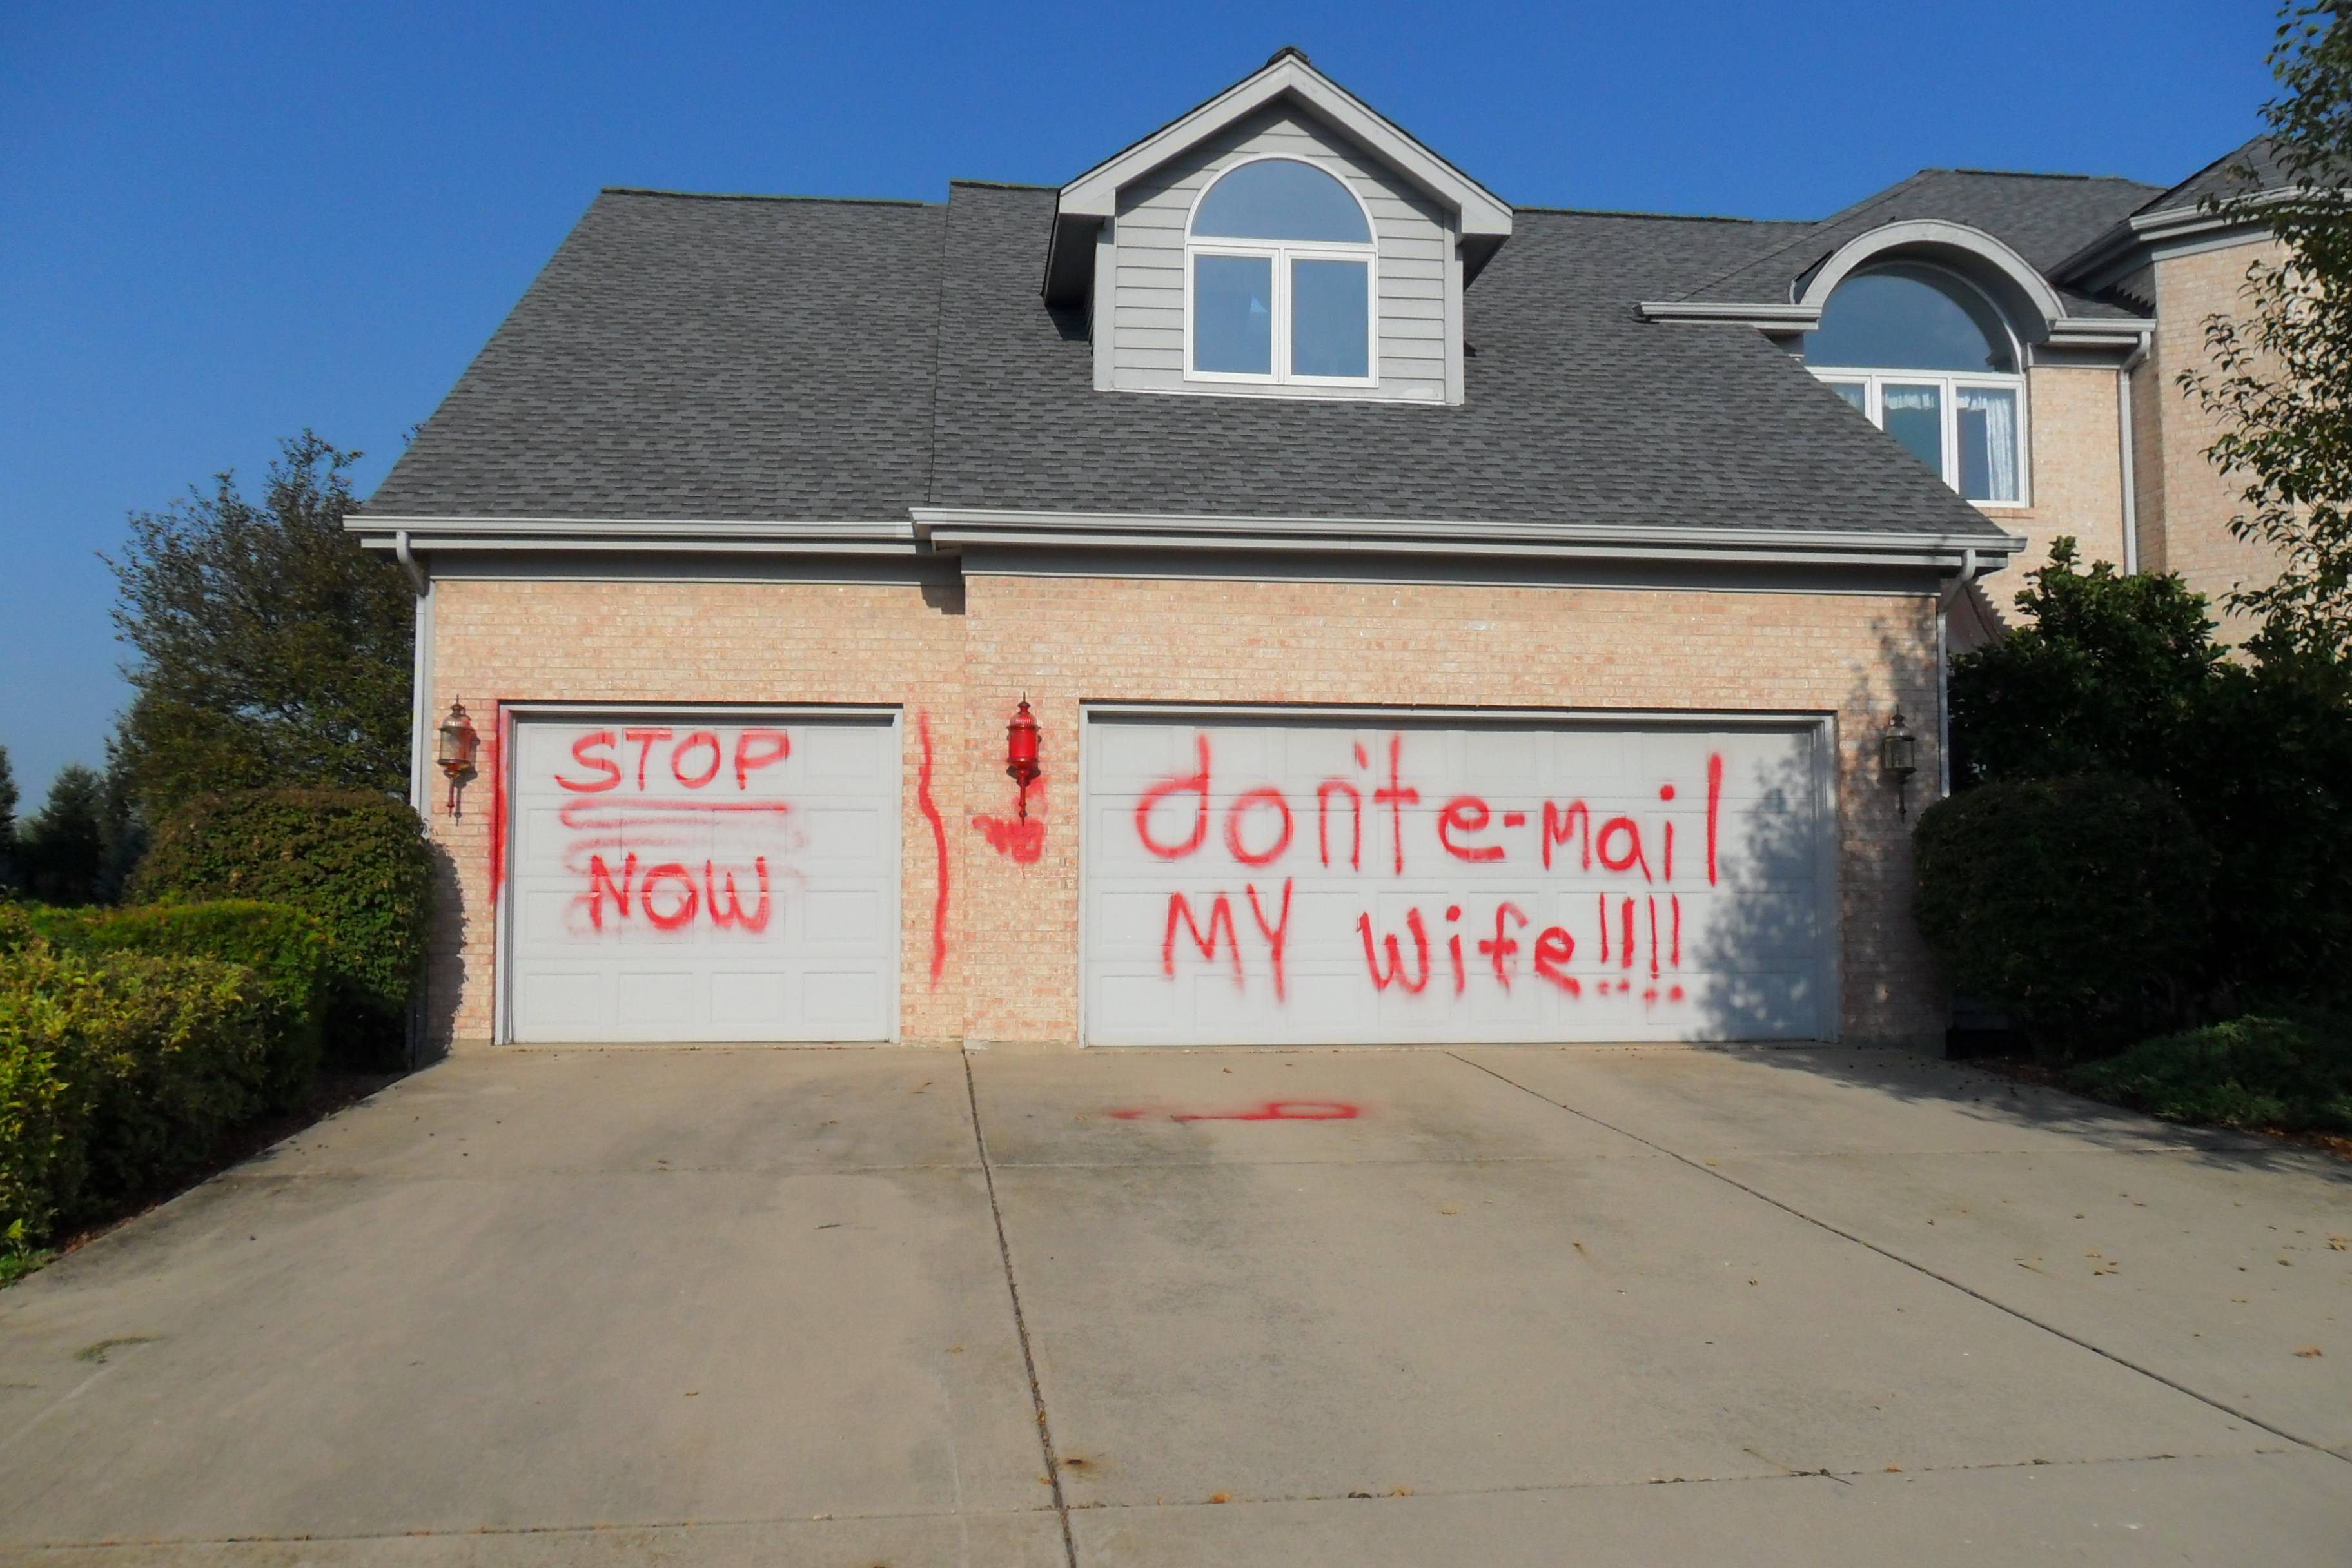 image of a suburban home with grafitti on the garage doors reading STOP NOW - DON'T EMAIL MY WIFE